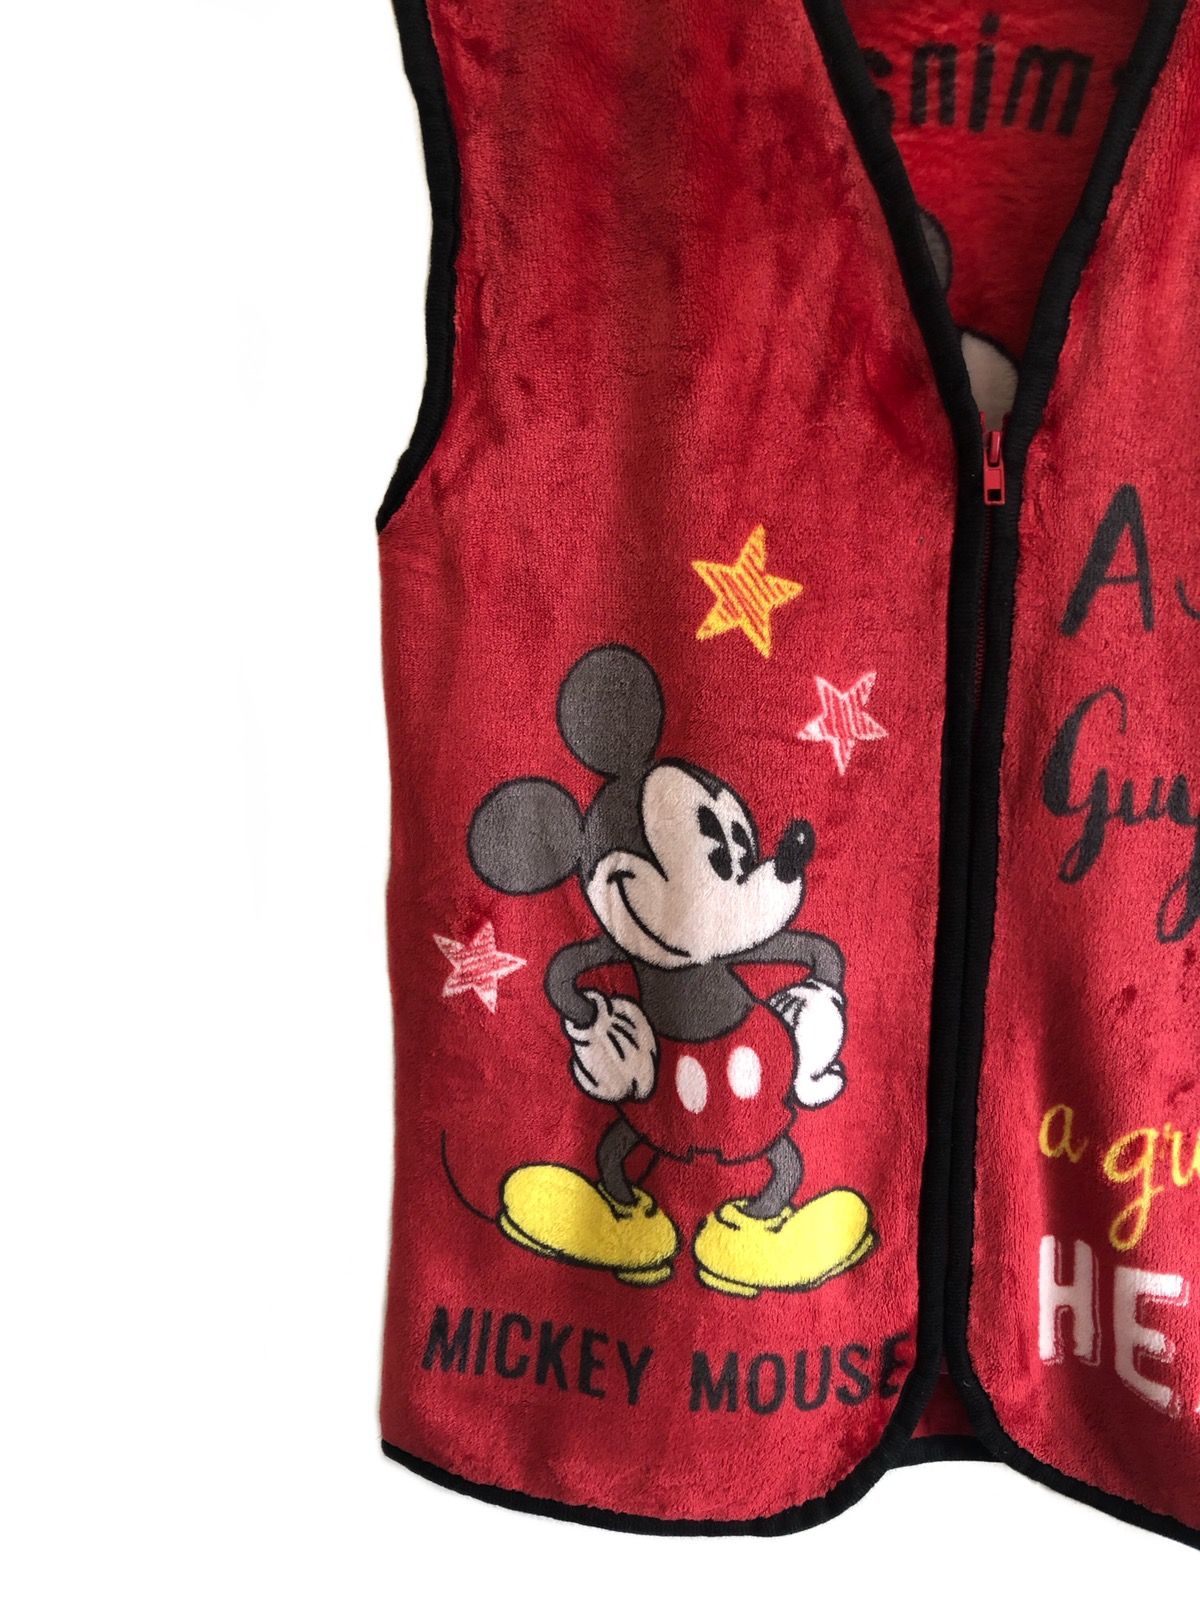 Vintage 80s Mickey Mouse cardigan vests - 4